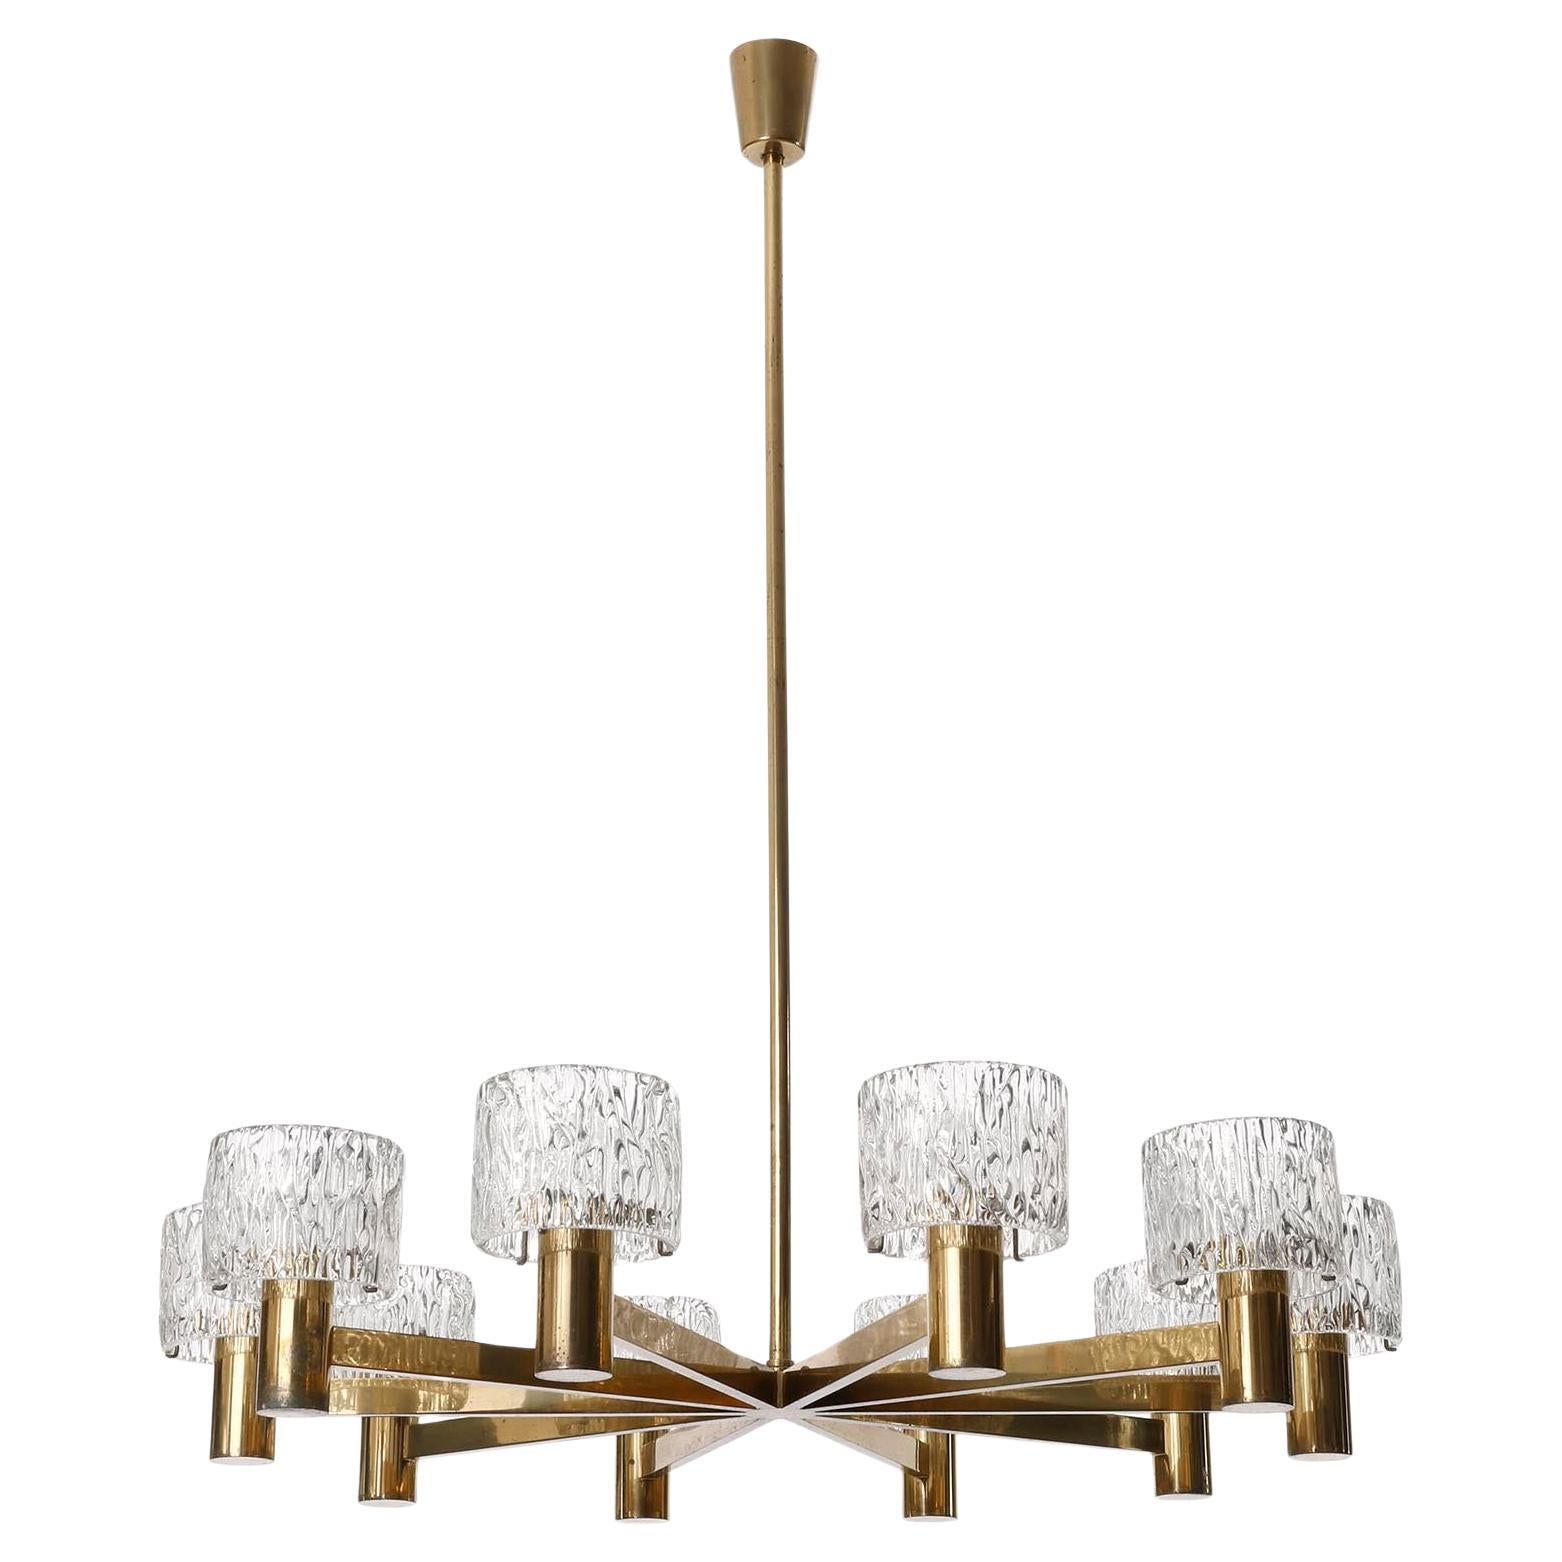 A beautiful and large 10-armed light fixture by J.T. Kalmar, Austria, manufactured in Mid-Century, circa 1960 (late 1950s to early 1960s). 
It consists of a frame made of solid, polished brass with an aged finish in a rich and warm tone with a great